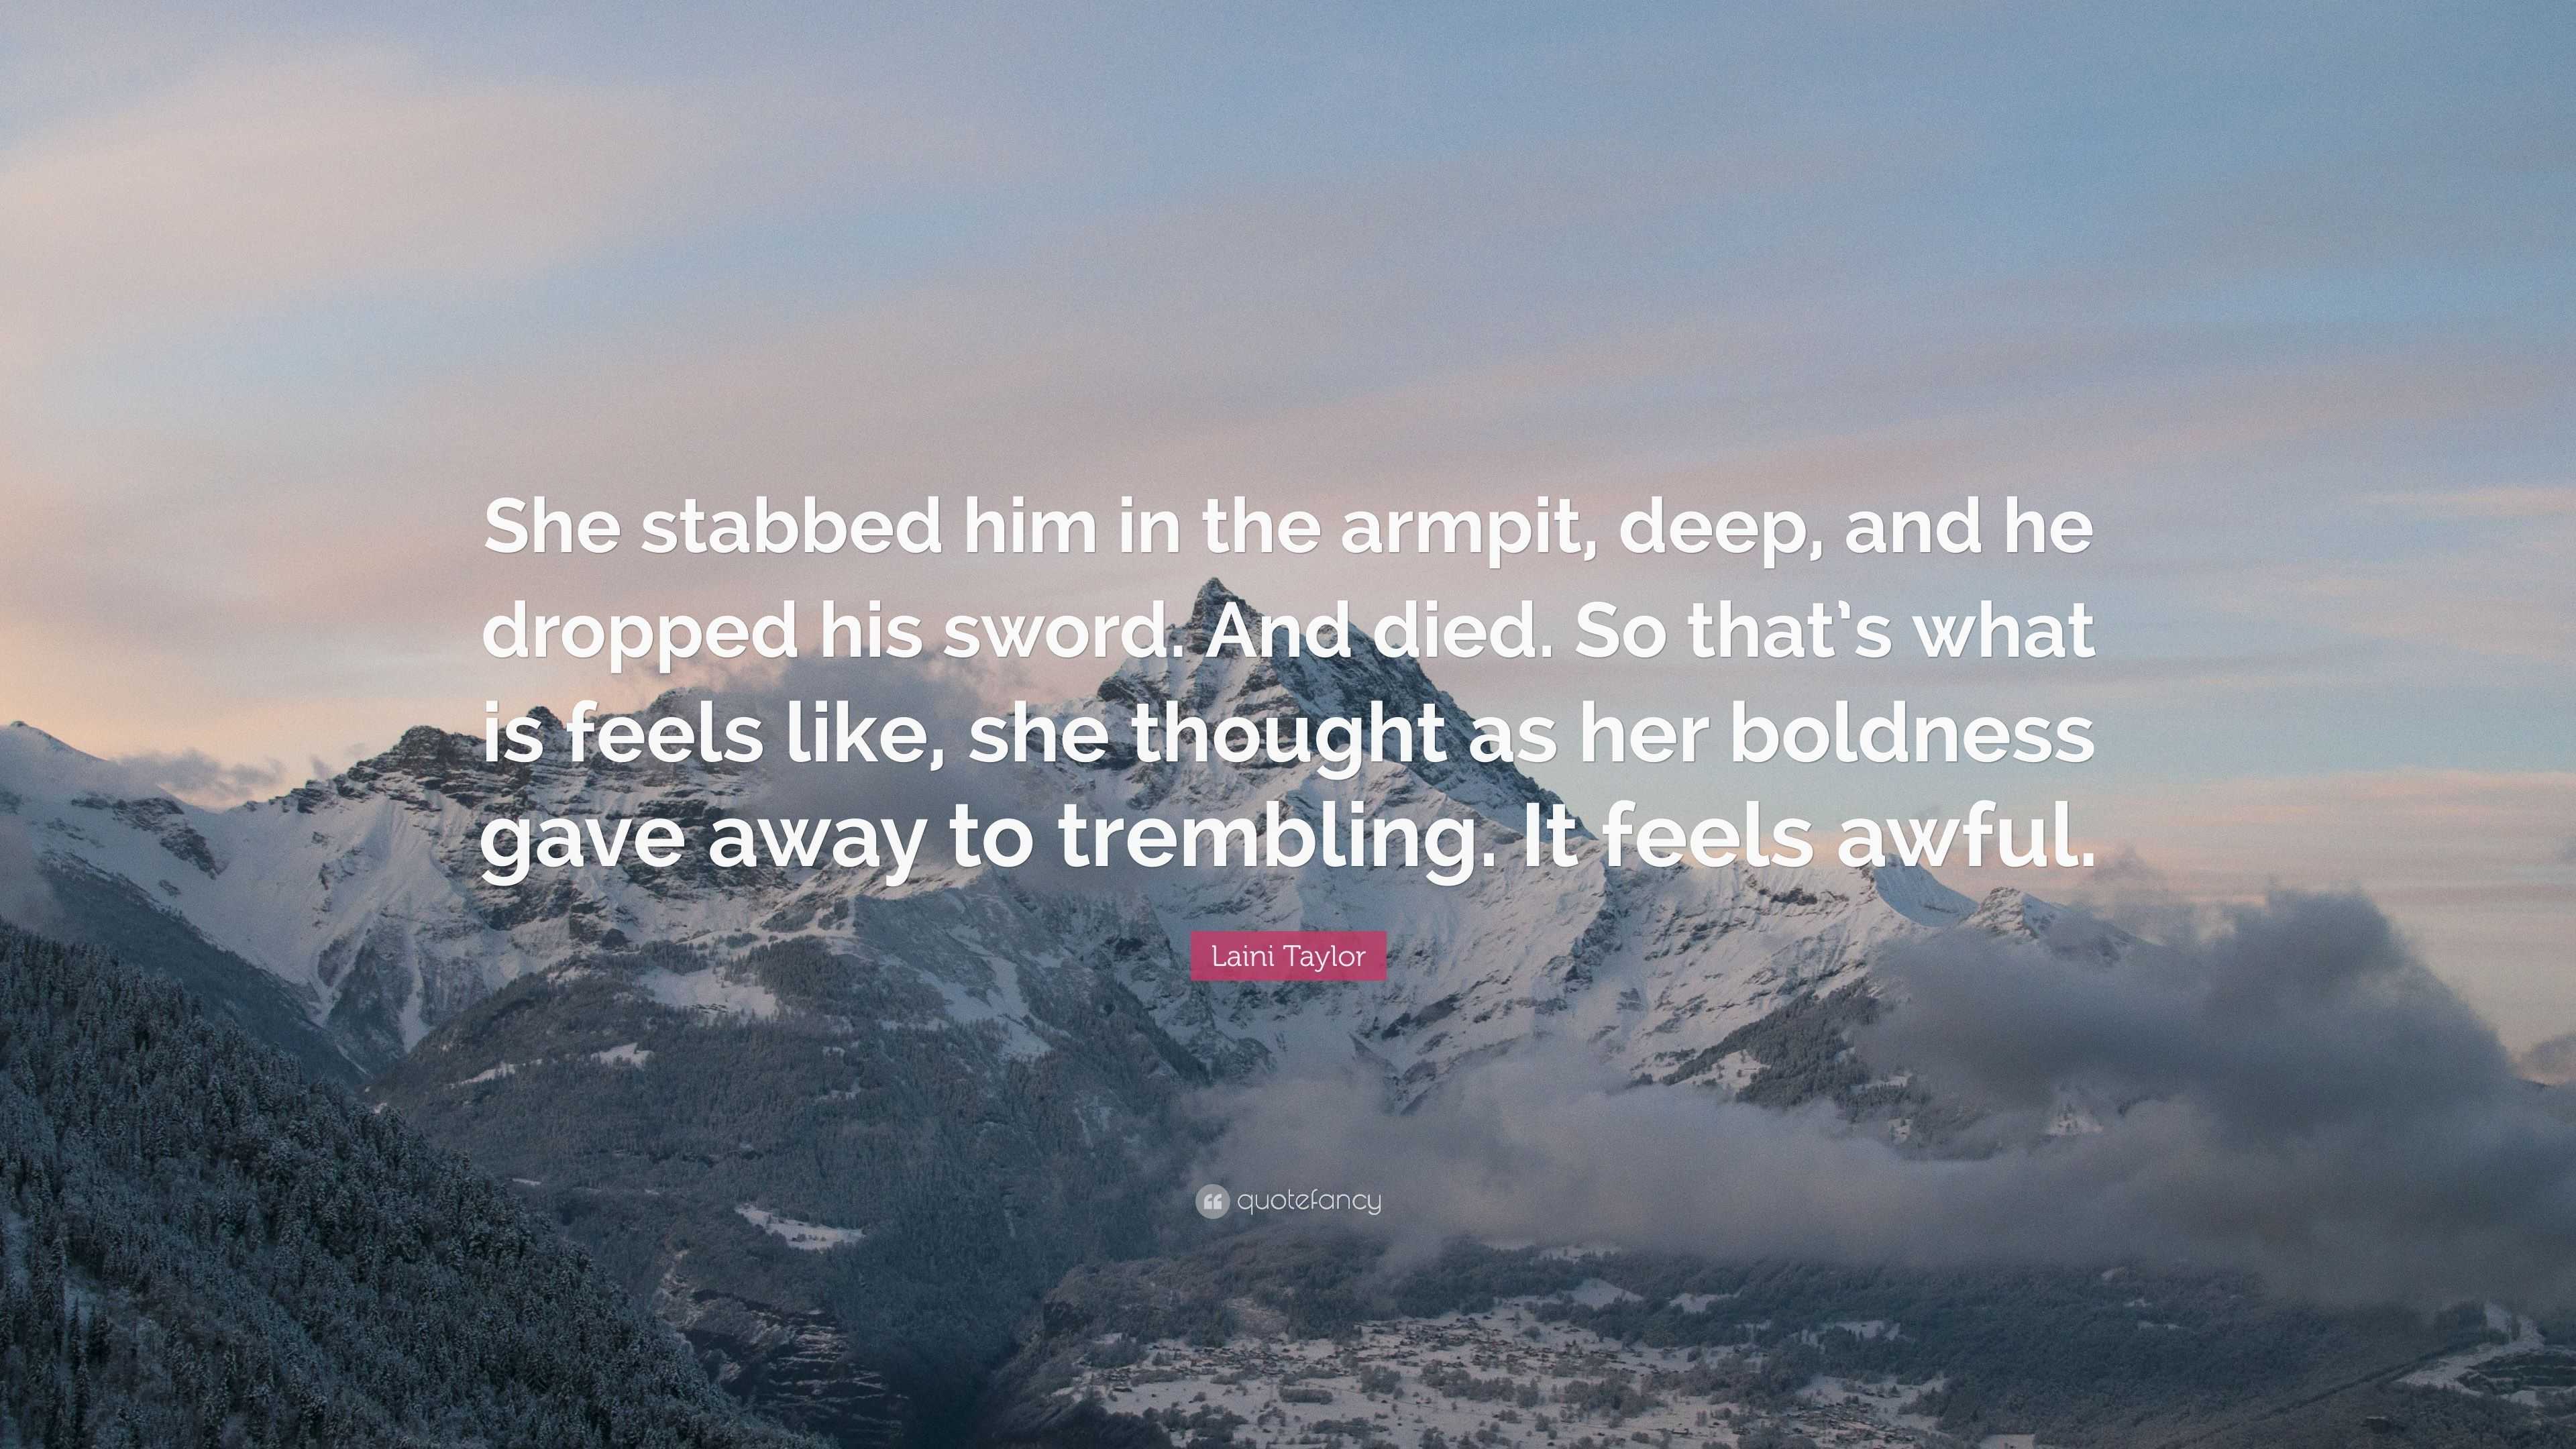 Laini Taylor Quote: “She stabbed him in the armpit, deep, and he ...